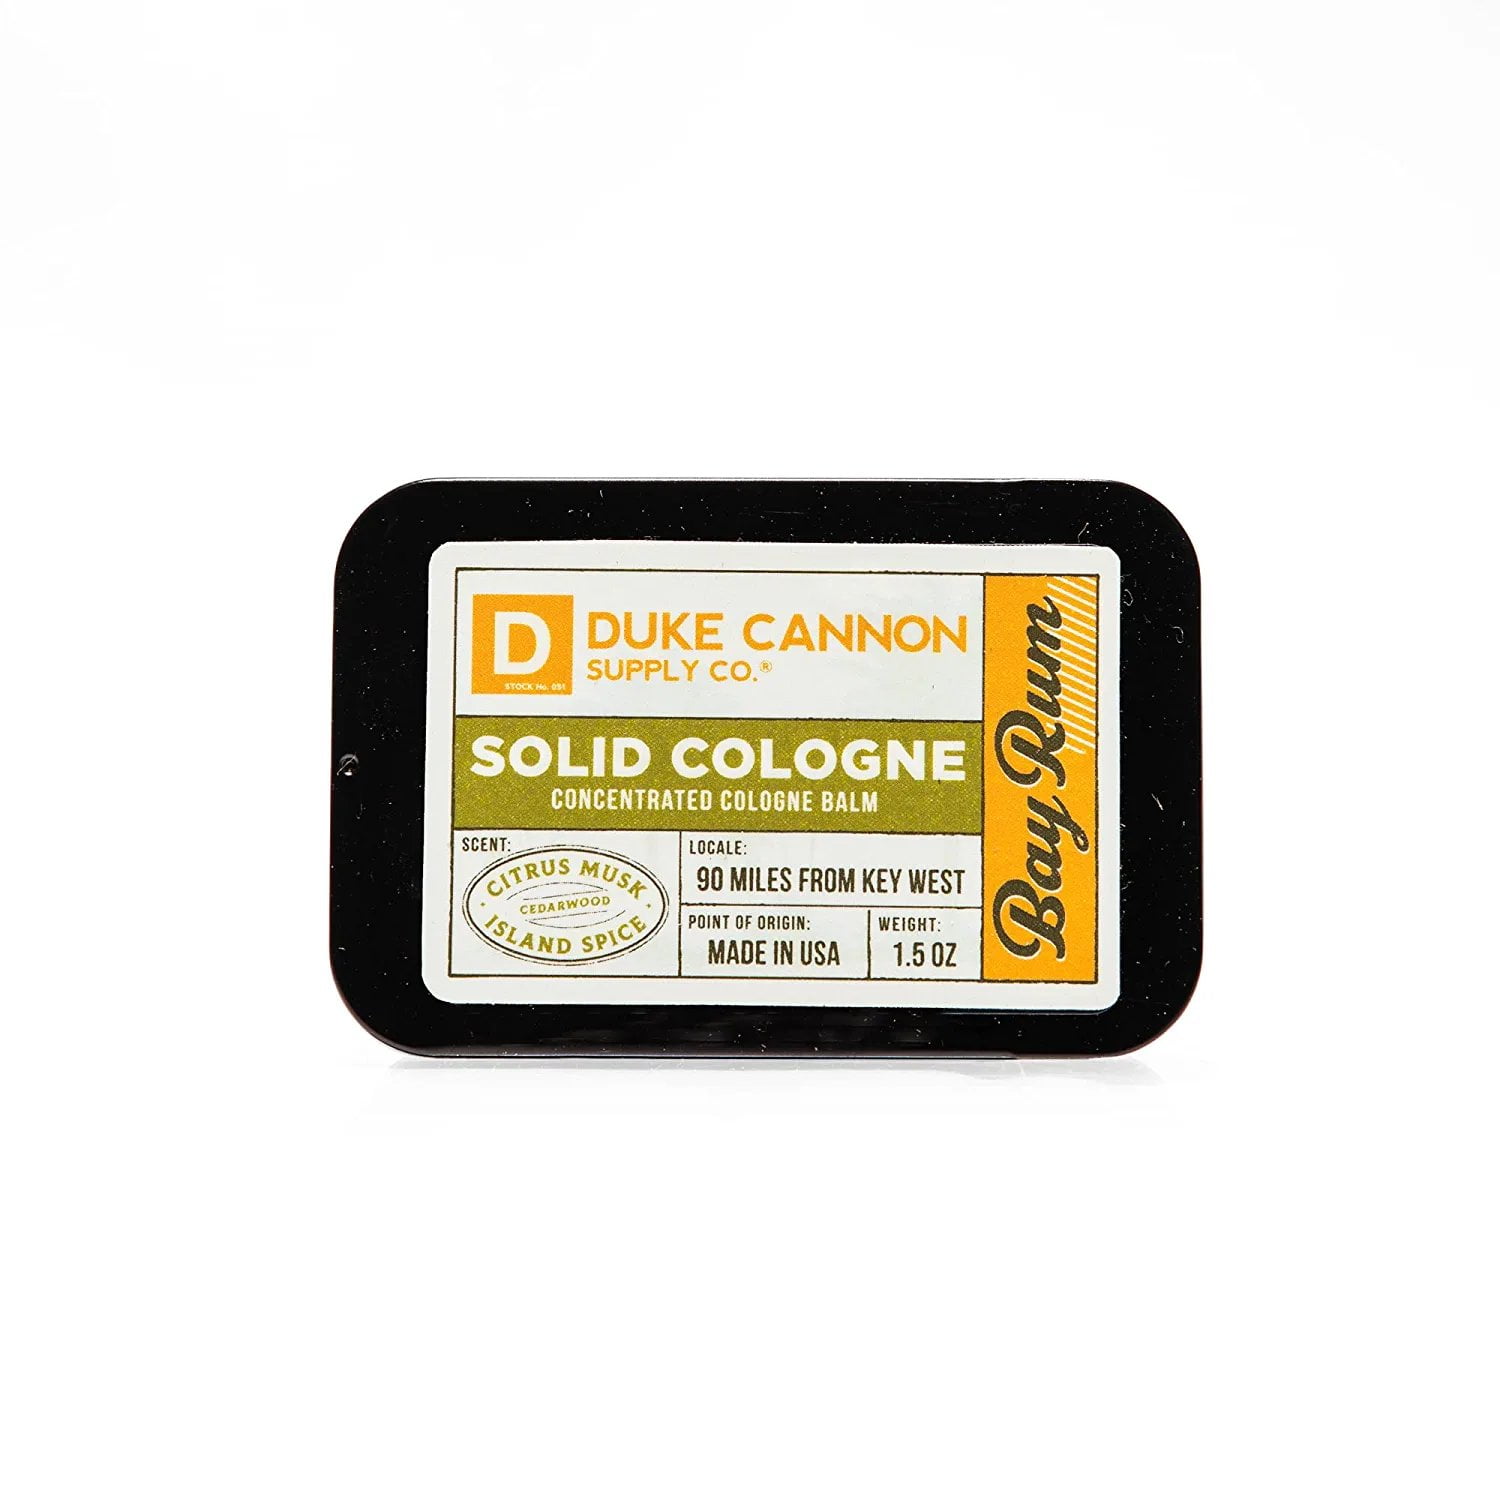 ENDING SOON] FREE Solid Cologne Booster! - Grondyke Soap Company